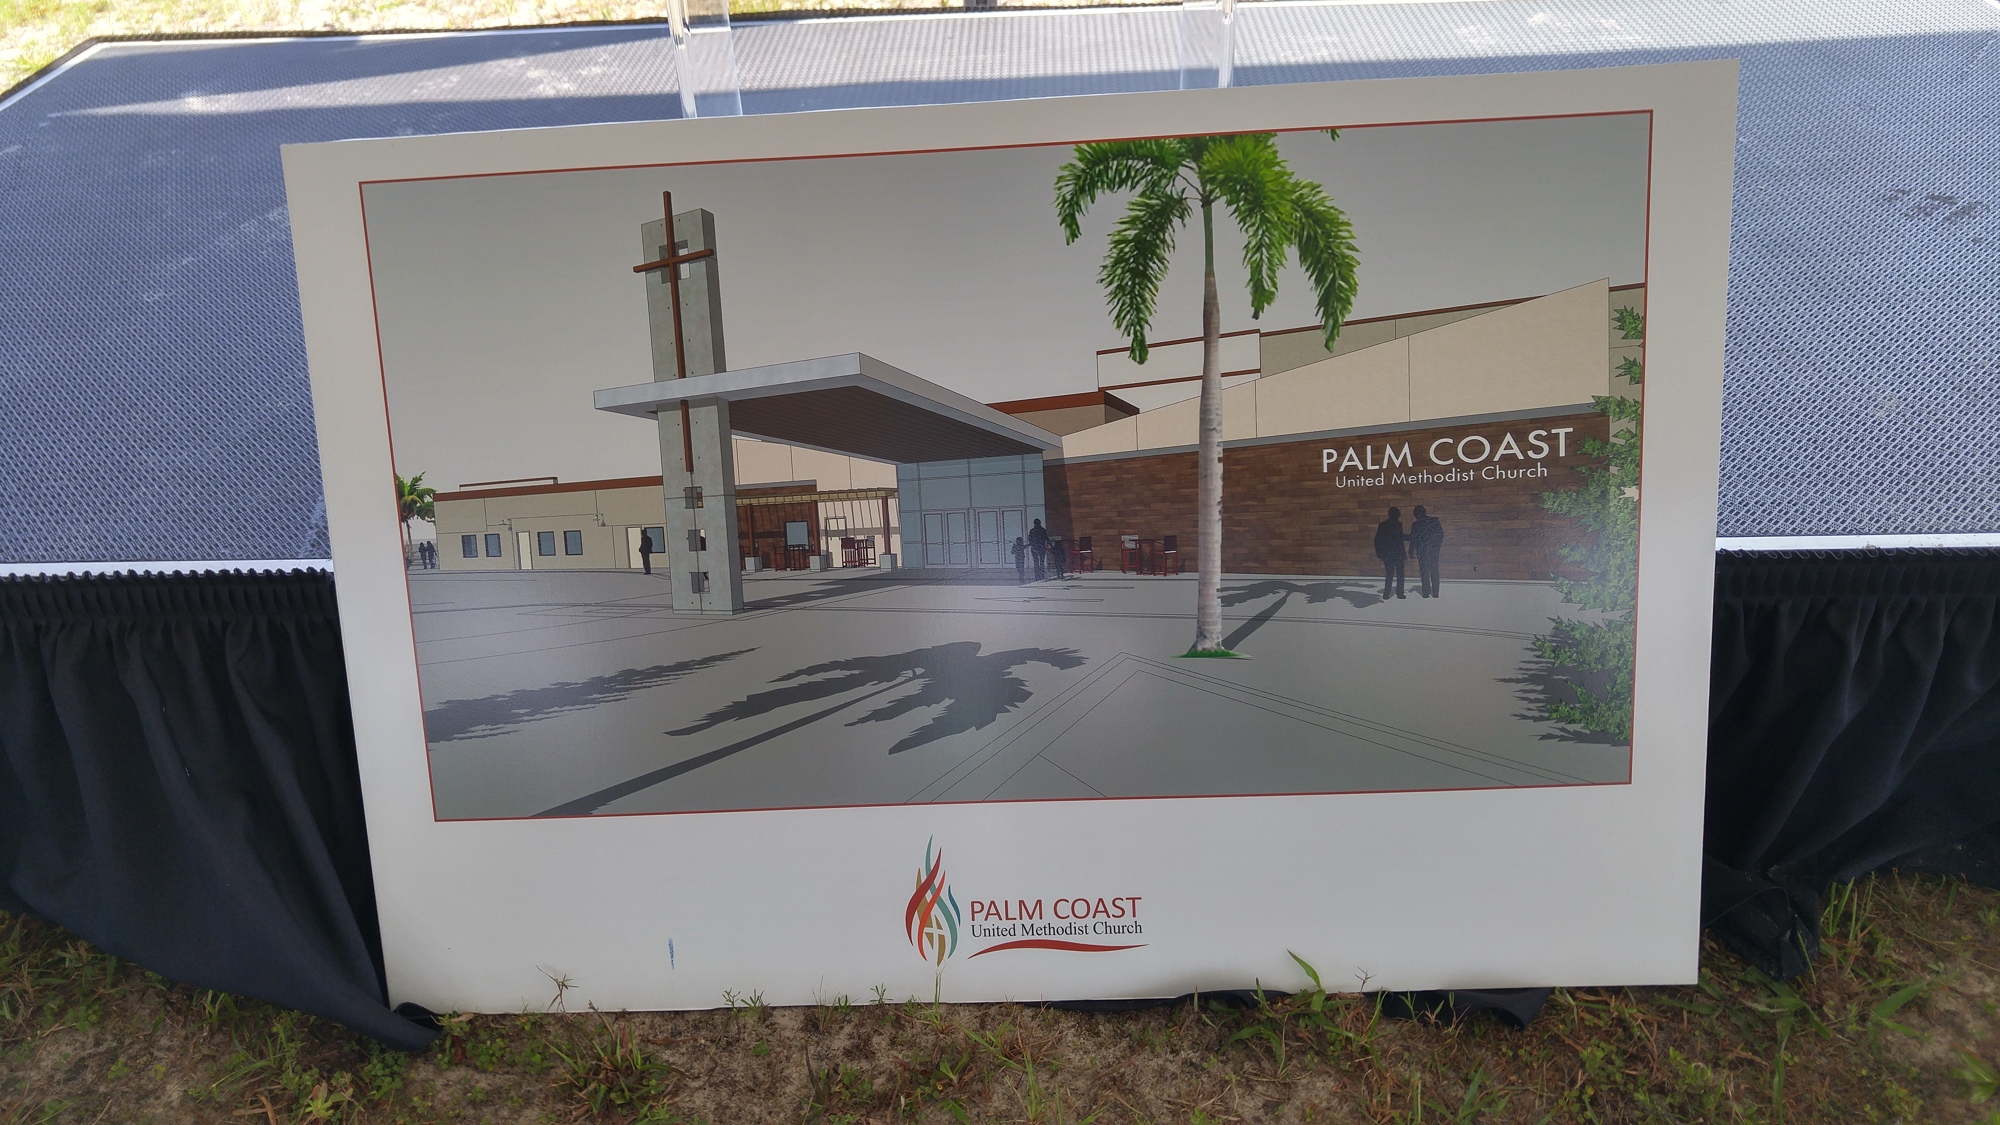 A rendering of the new Palm Coast United Methodist Church. Photo by Brent Woronoff